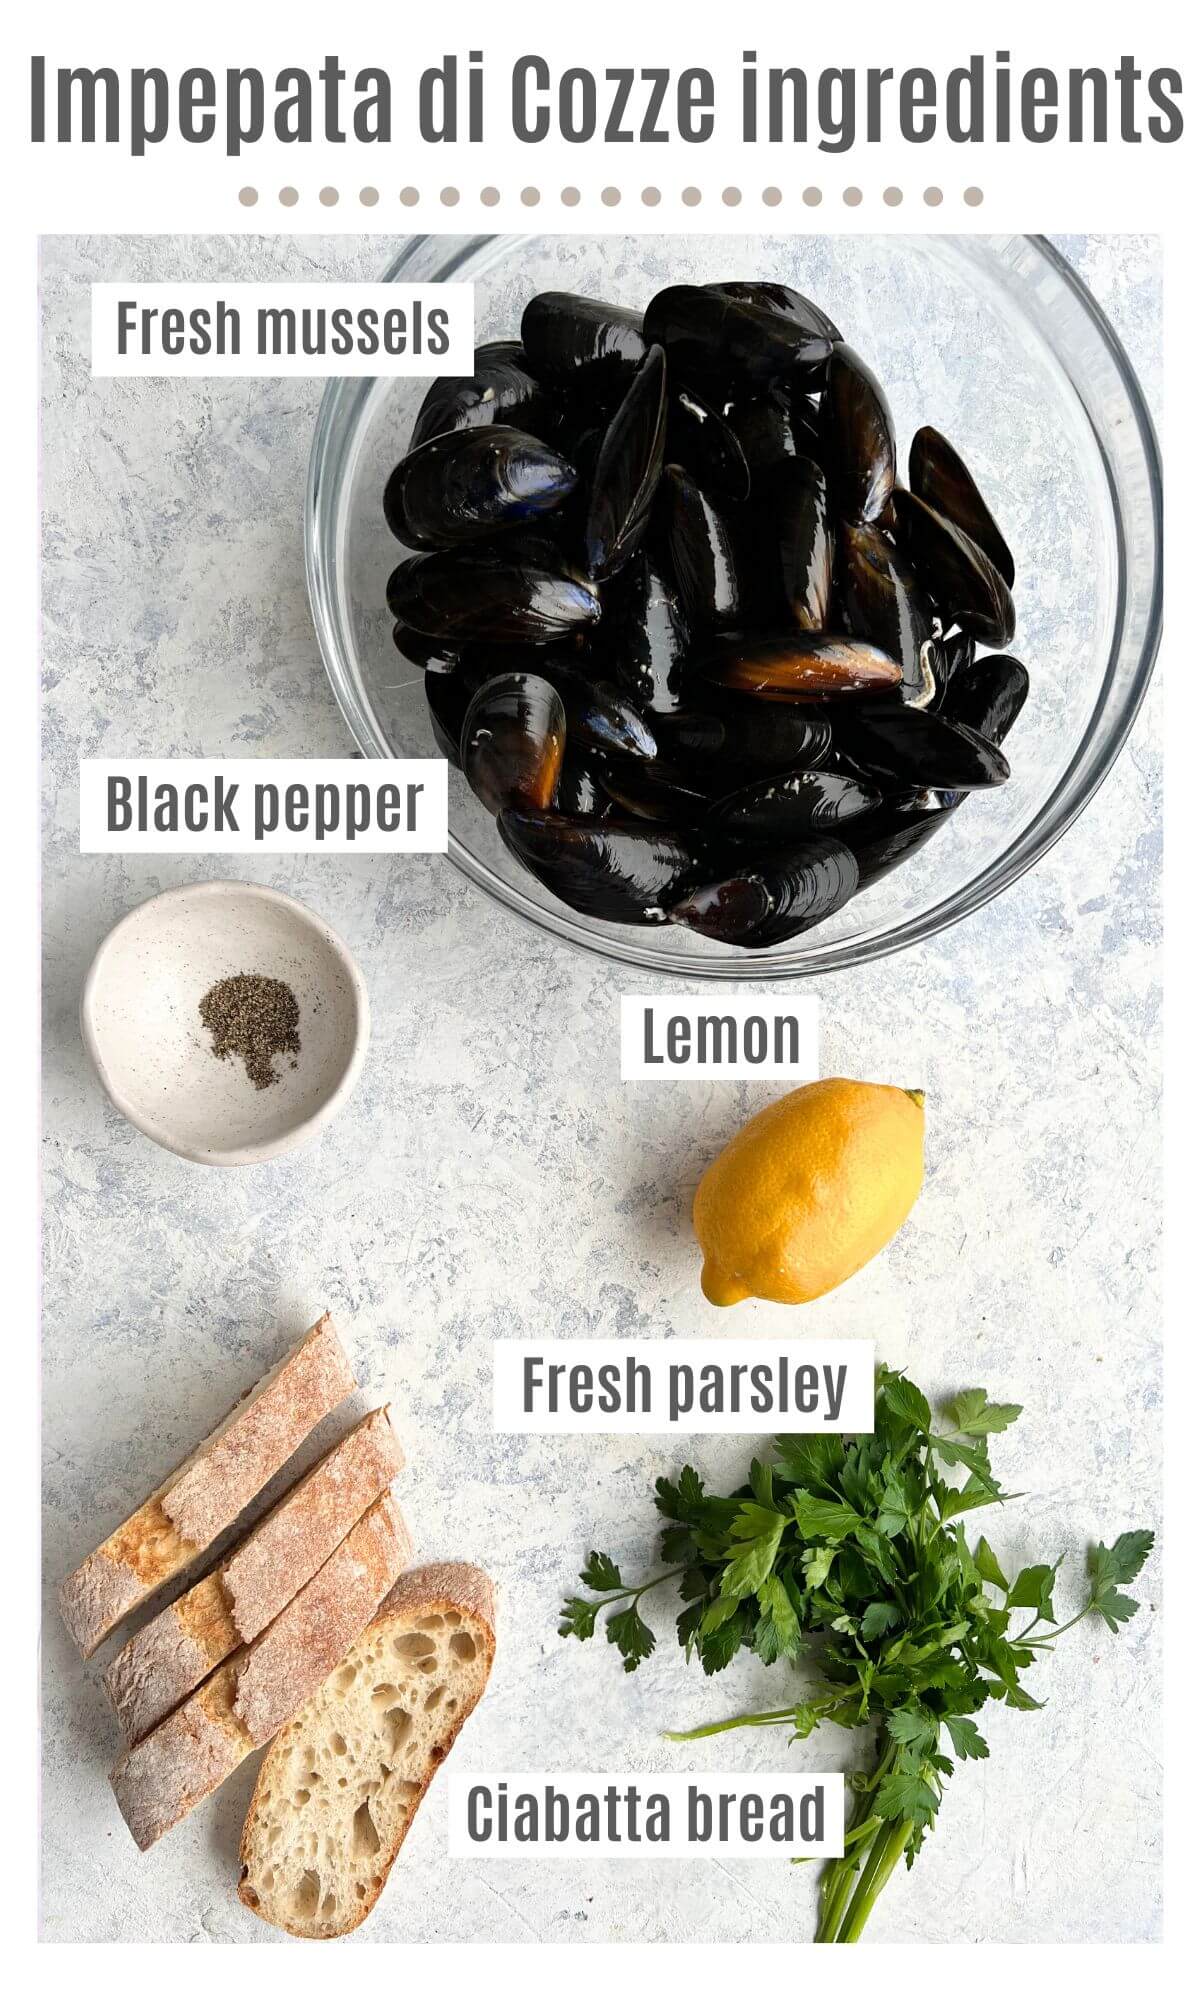 An overhead shot of all the ingredients needed to make Impepata di Cozze (mussels with pepper).